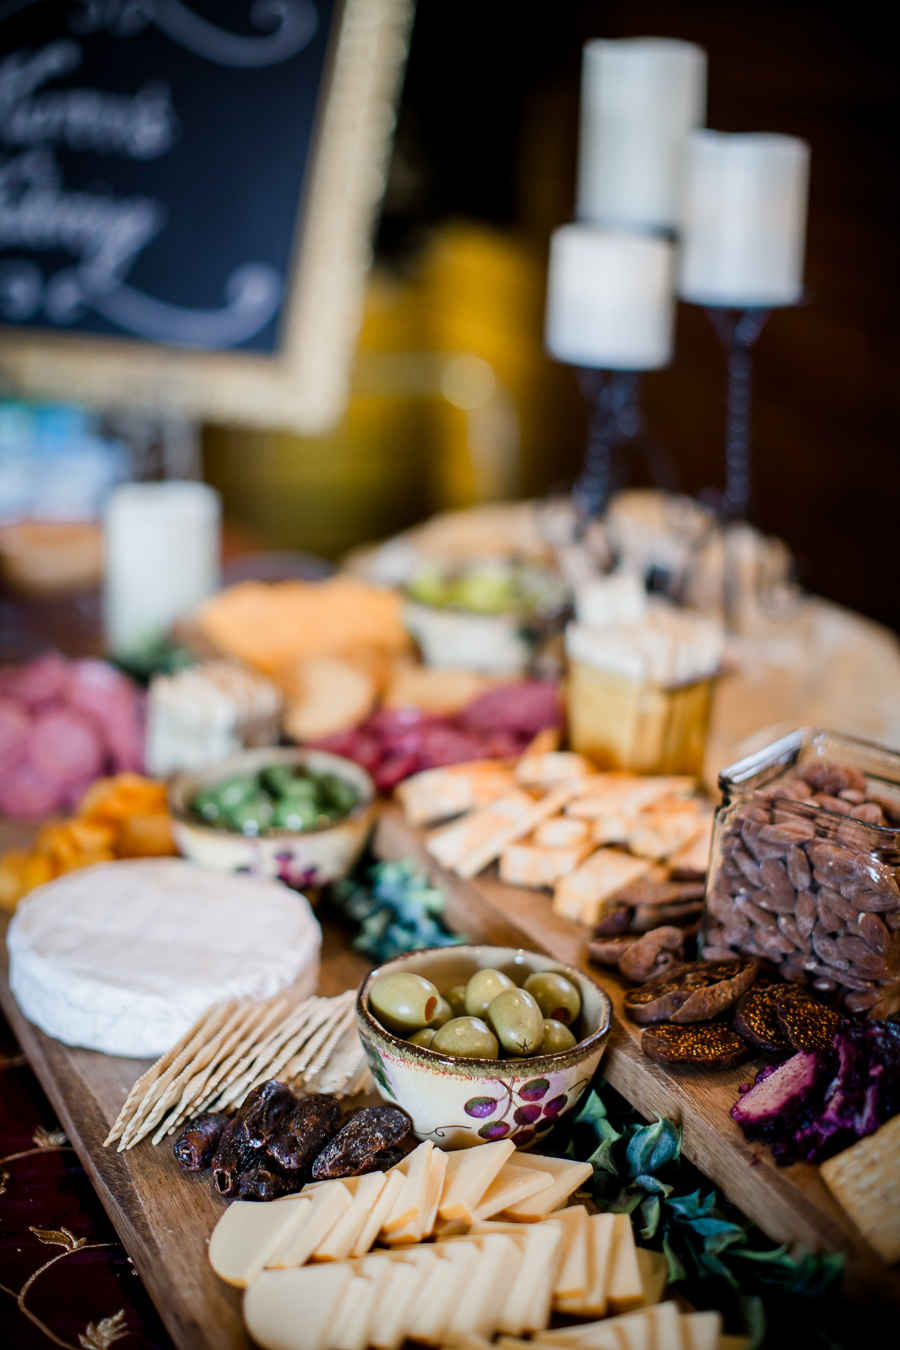 Karen's Katering cheese, olive and salami display at the open house of Knoxville Wedding Venue, Hunter Valley Farm, by Knoxville Wedding Photographer, Amanda May Photos.